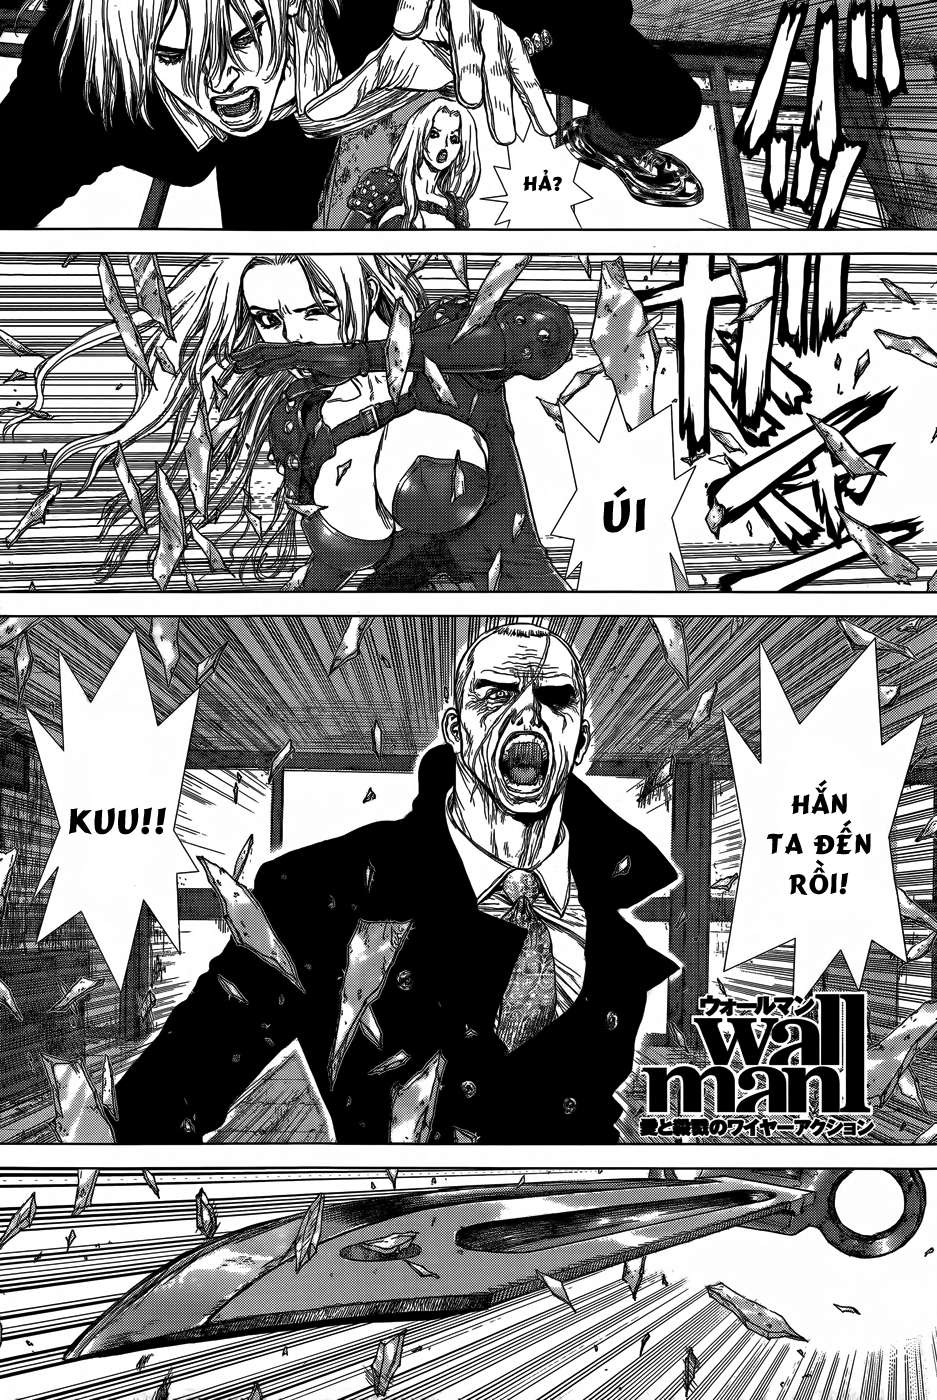 Characters appearing in Wallman Manga | Anime-Planet